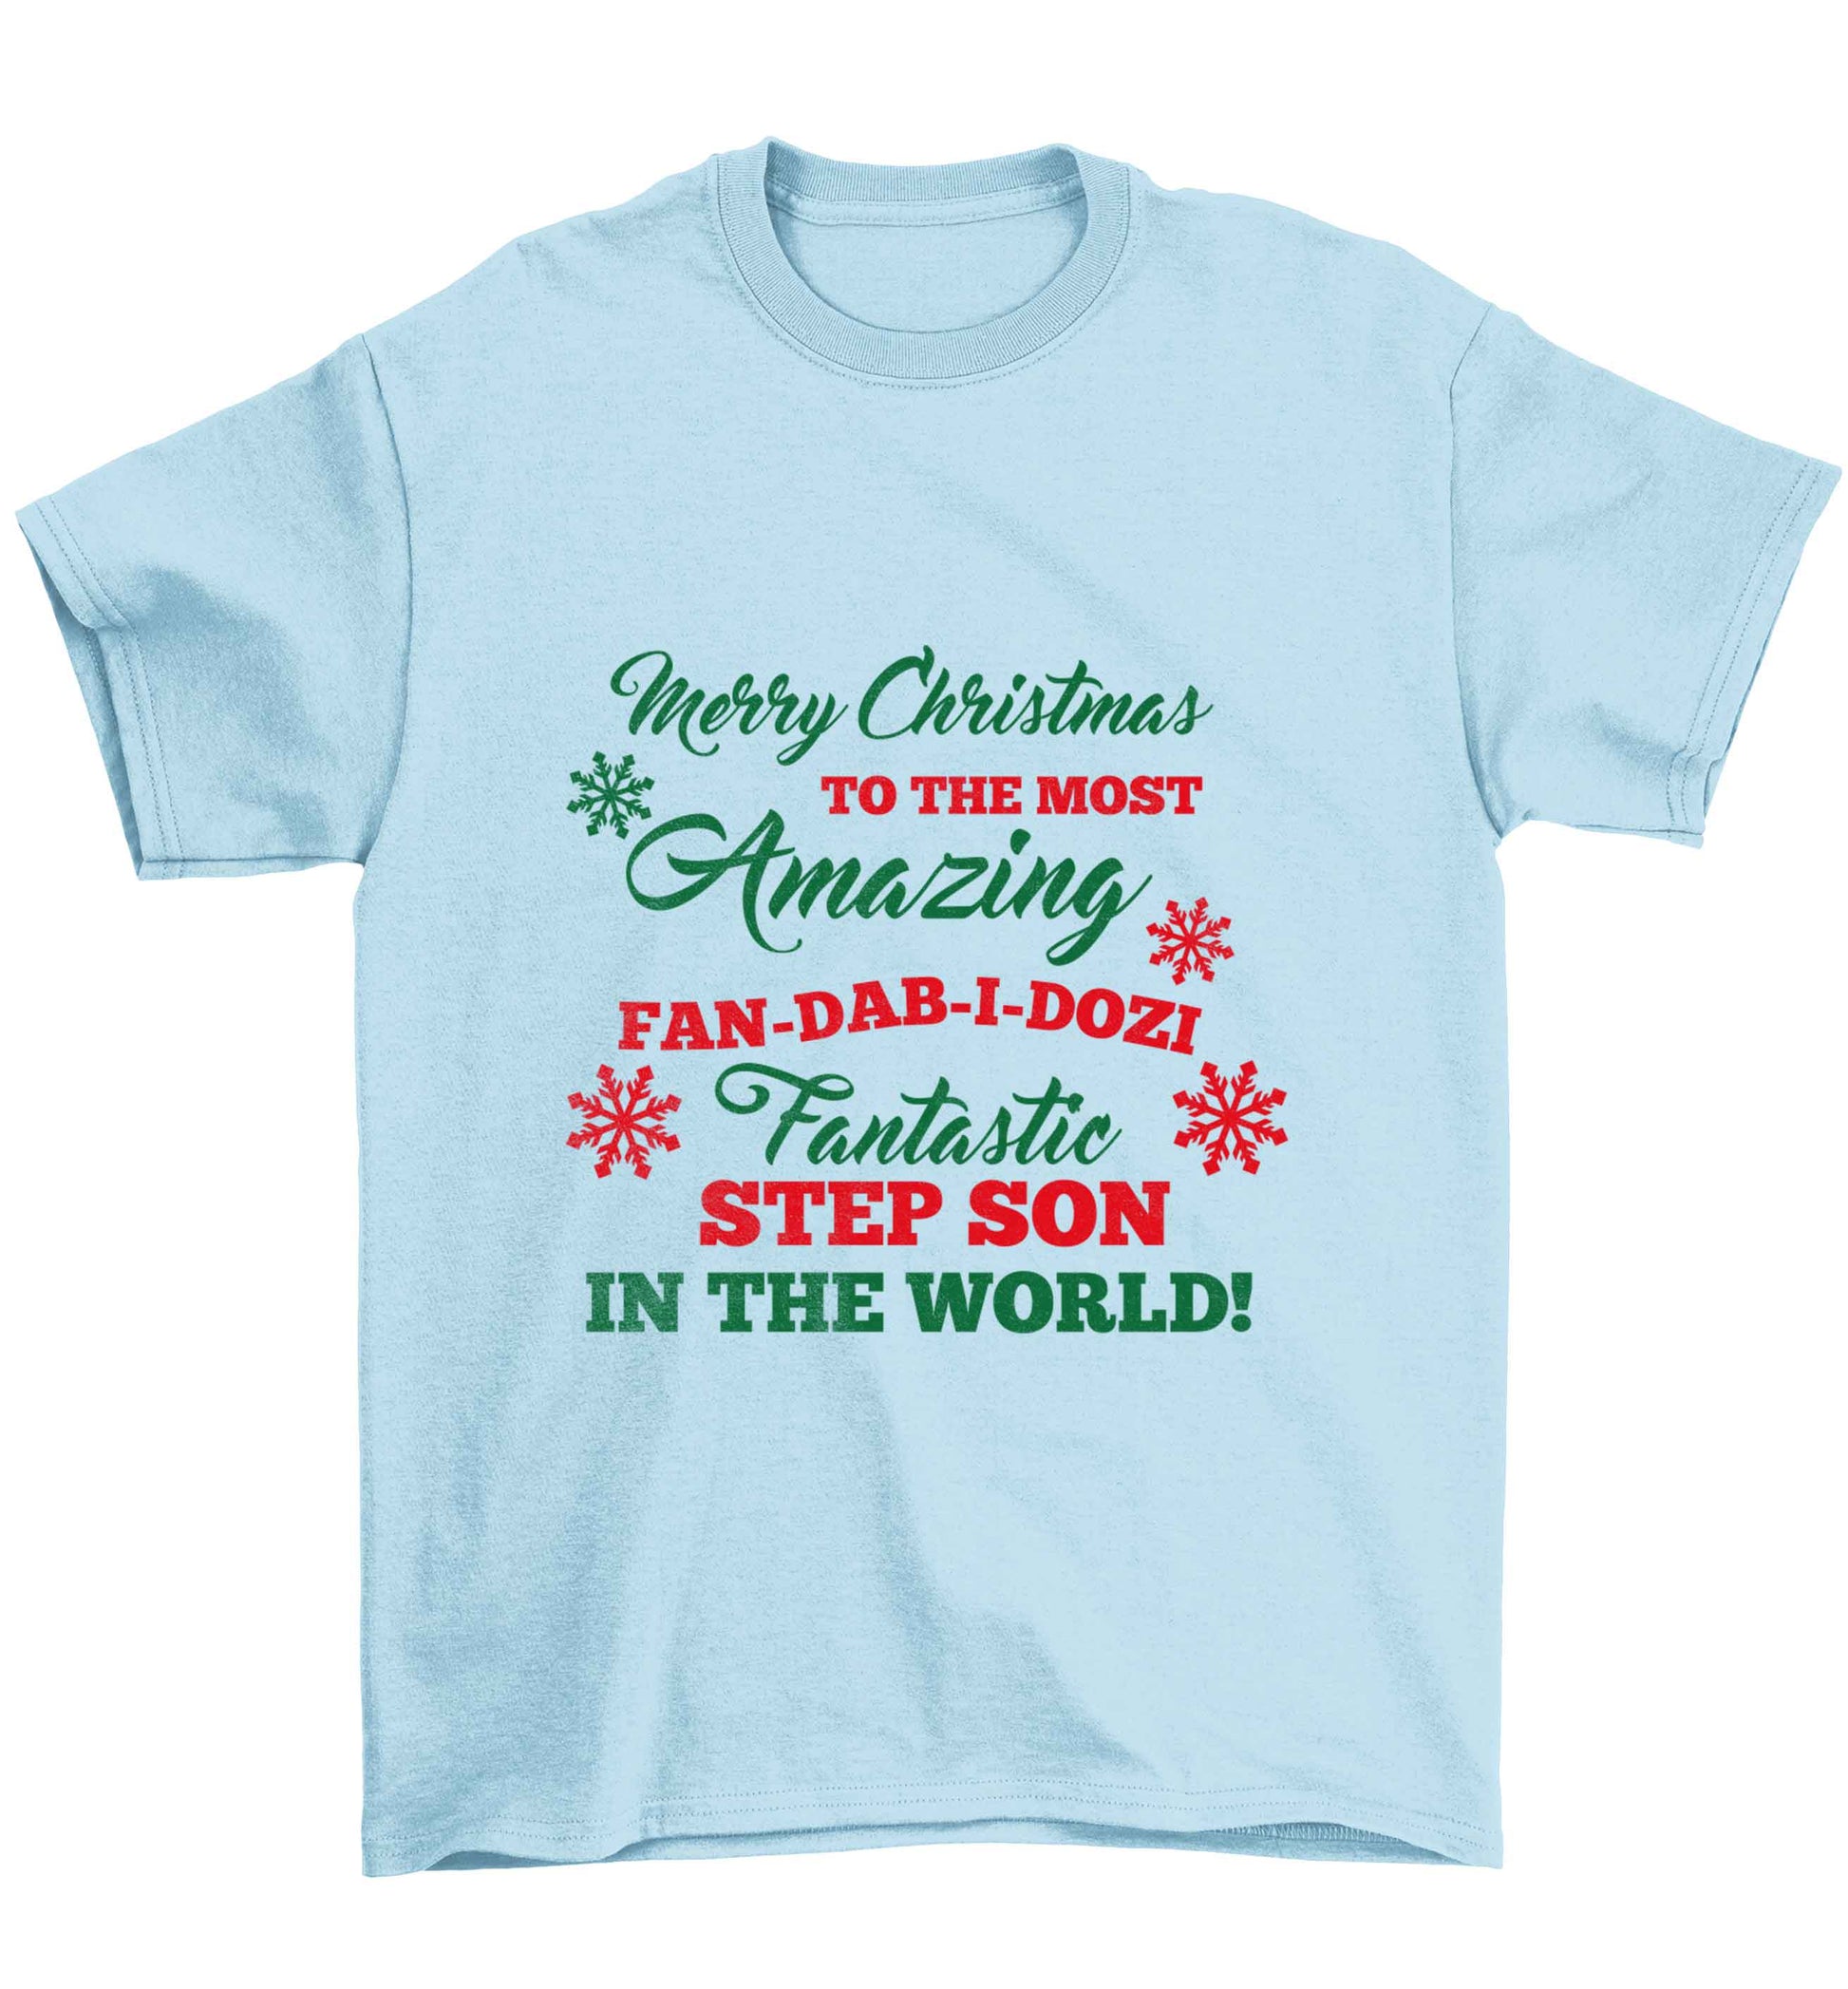 Merry Christmas to the most amazing fan-dab-i-dozi fantasic Step Son in the world Children's light blue Tshirt 12-13 Years